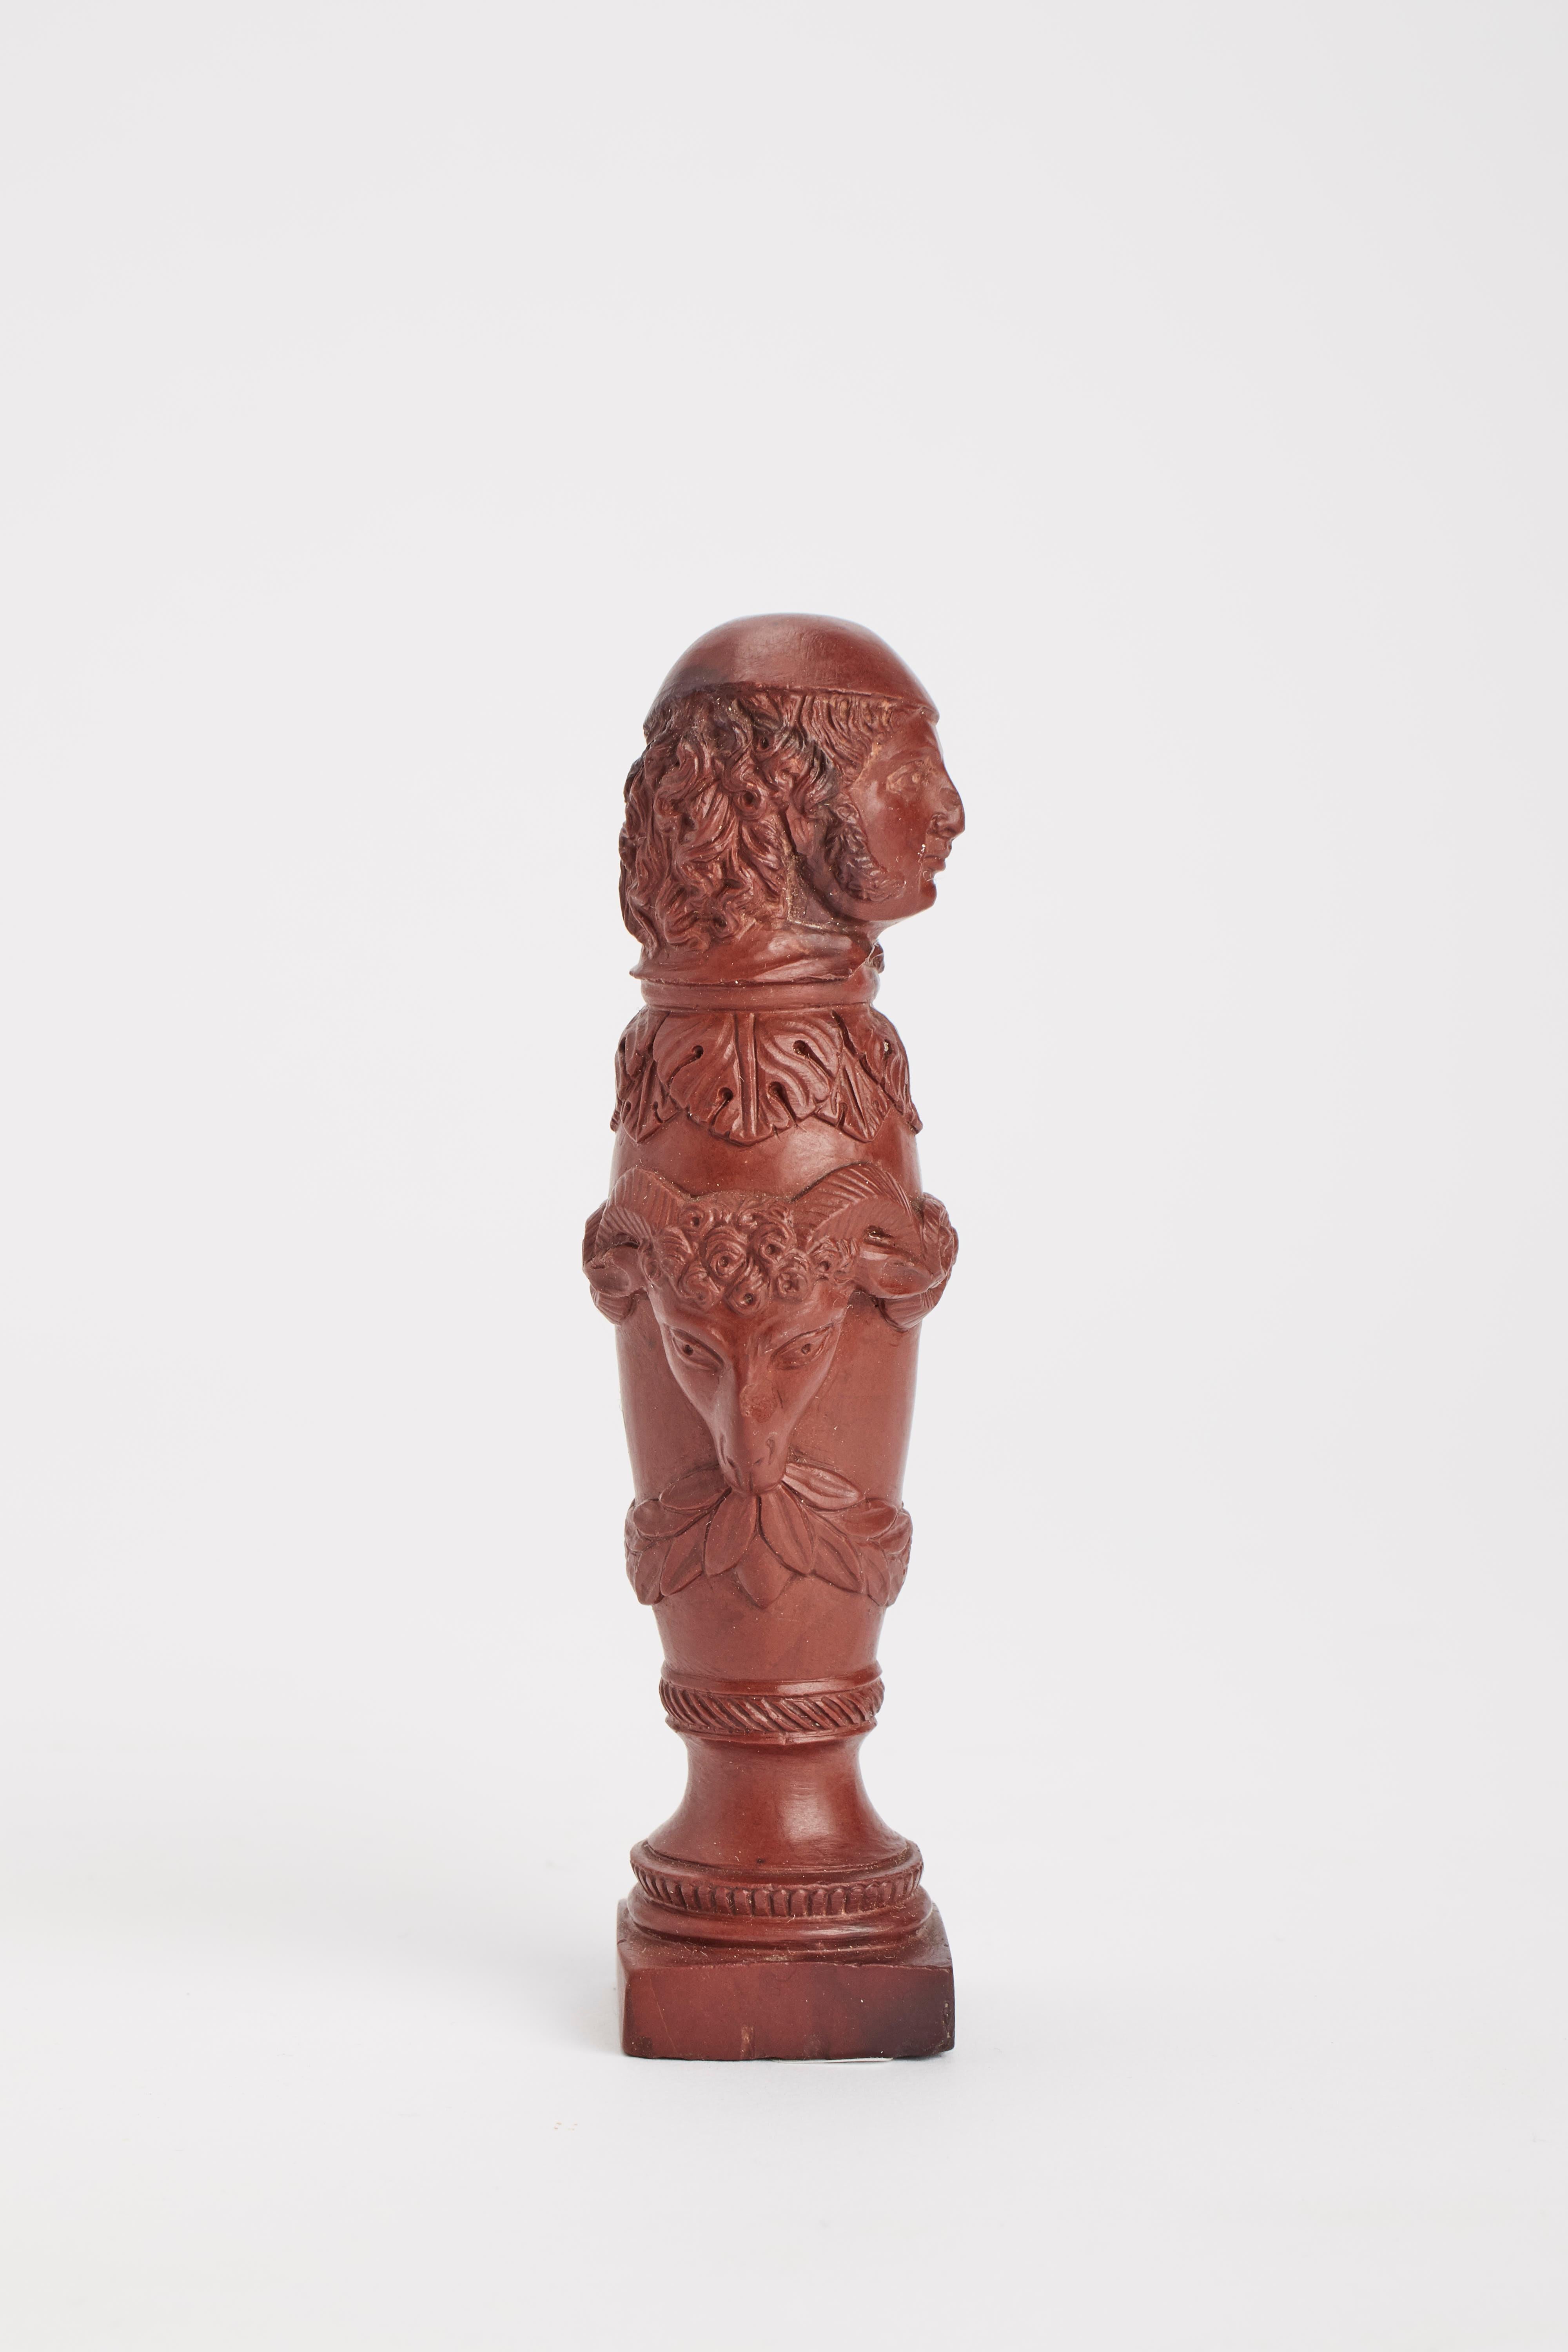 A Neoclassical Grand Tour seal, carved out of red lava, depicting an Italian character with beret, garlands and ram heads over a stylized column. Italy 1840 ca.